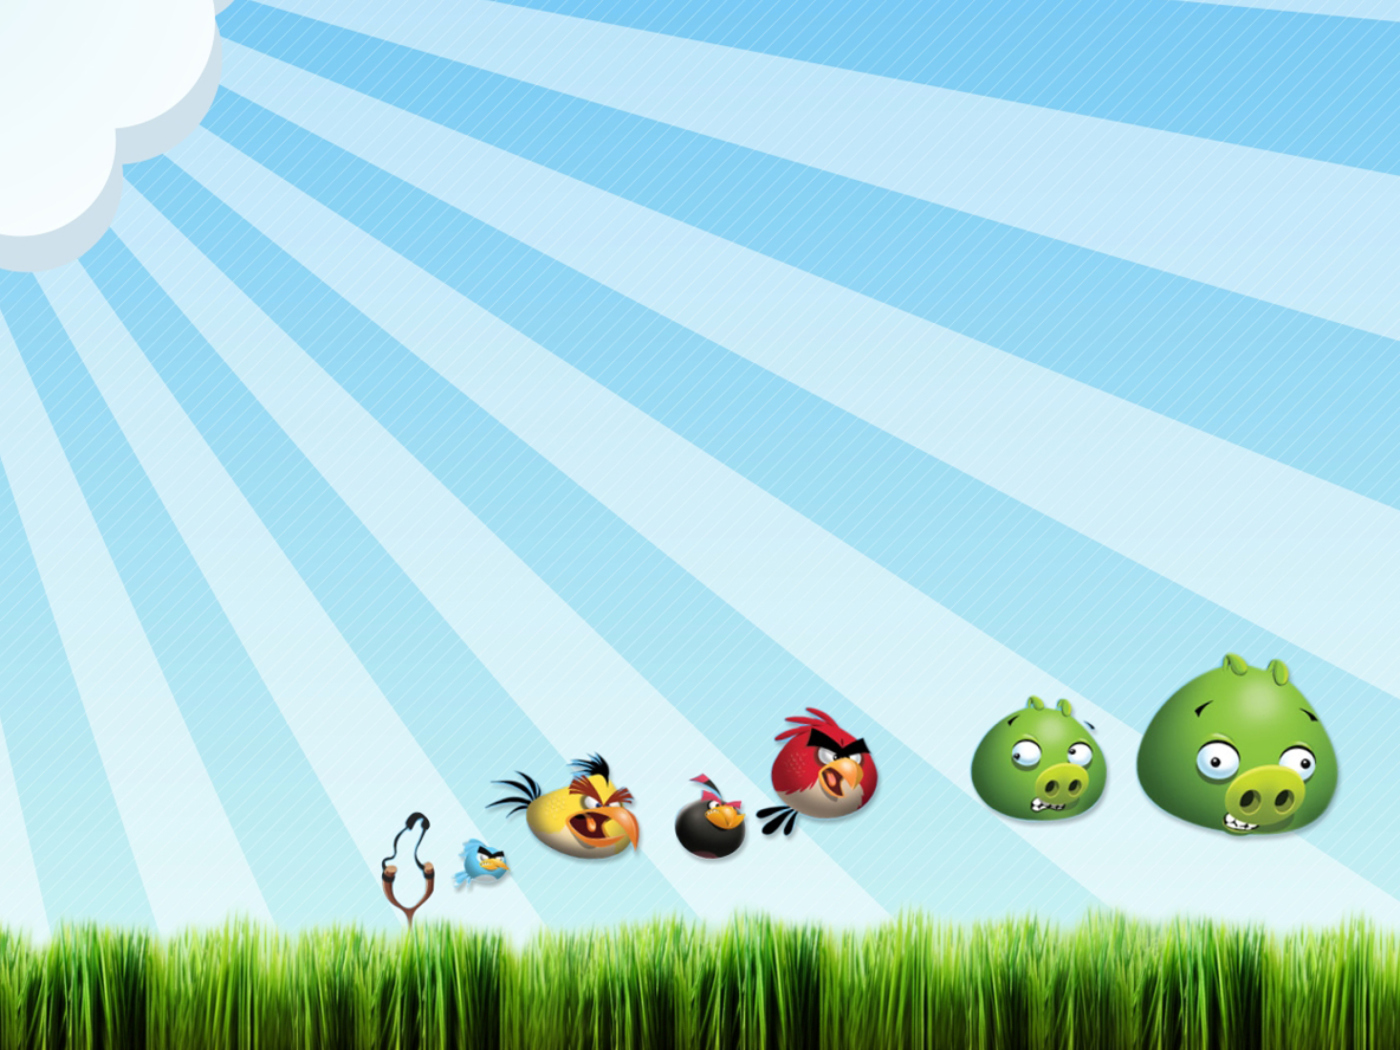 Angry Birds Bad Pigs wallpaper 1400x1050